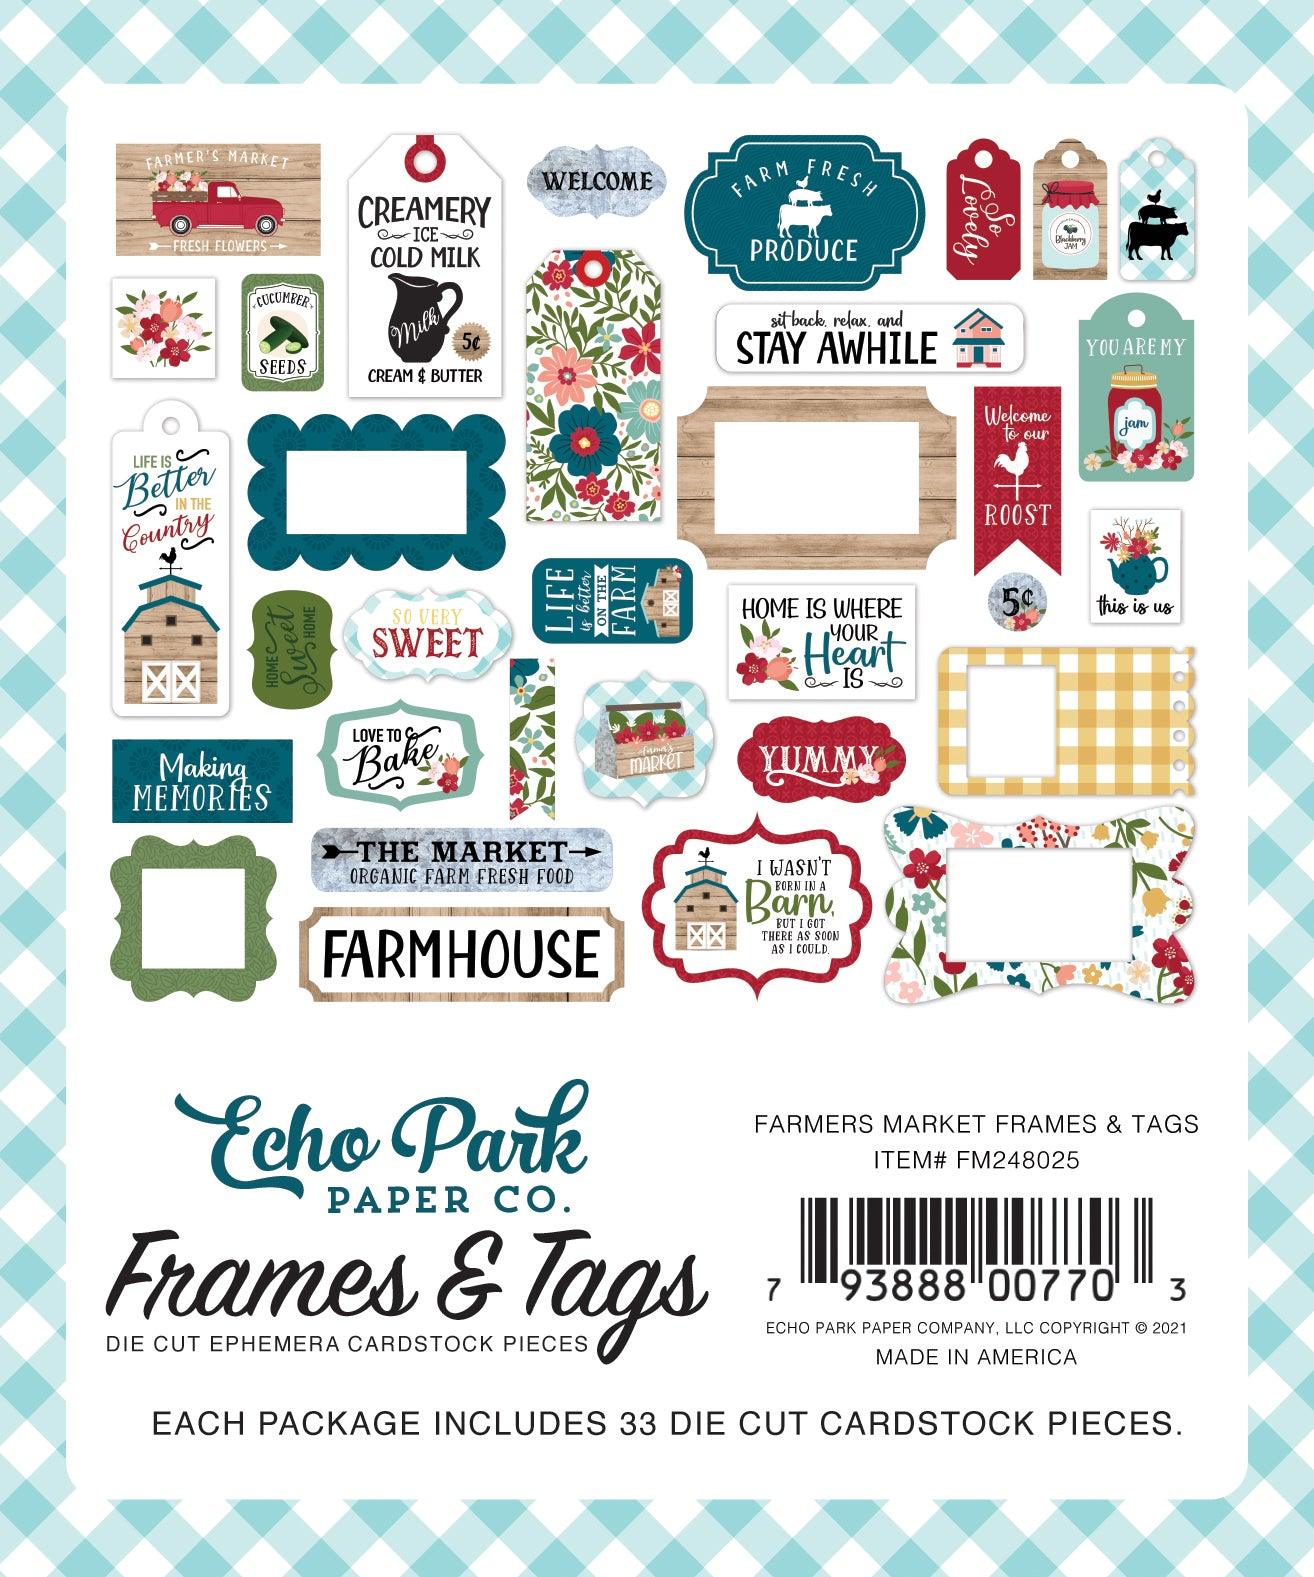 Farmer's Market Collection 5 x 5 Scrapbook Tags & Frames Die Cuts by Echo Park Paper - Scrapbook Supply Companies